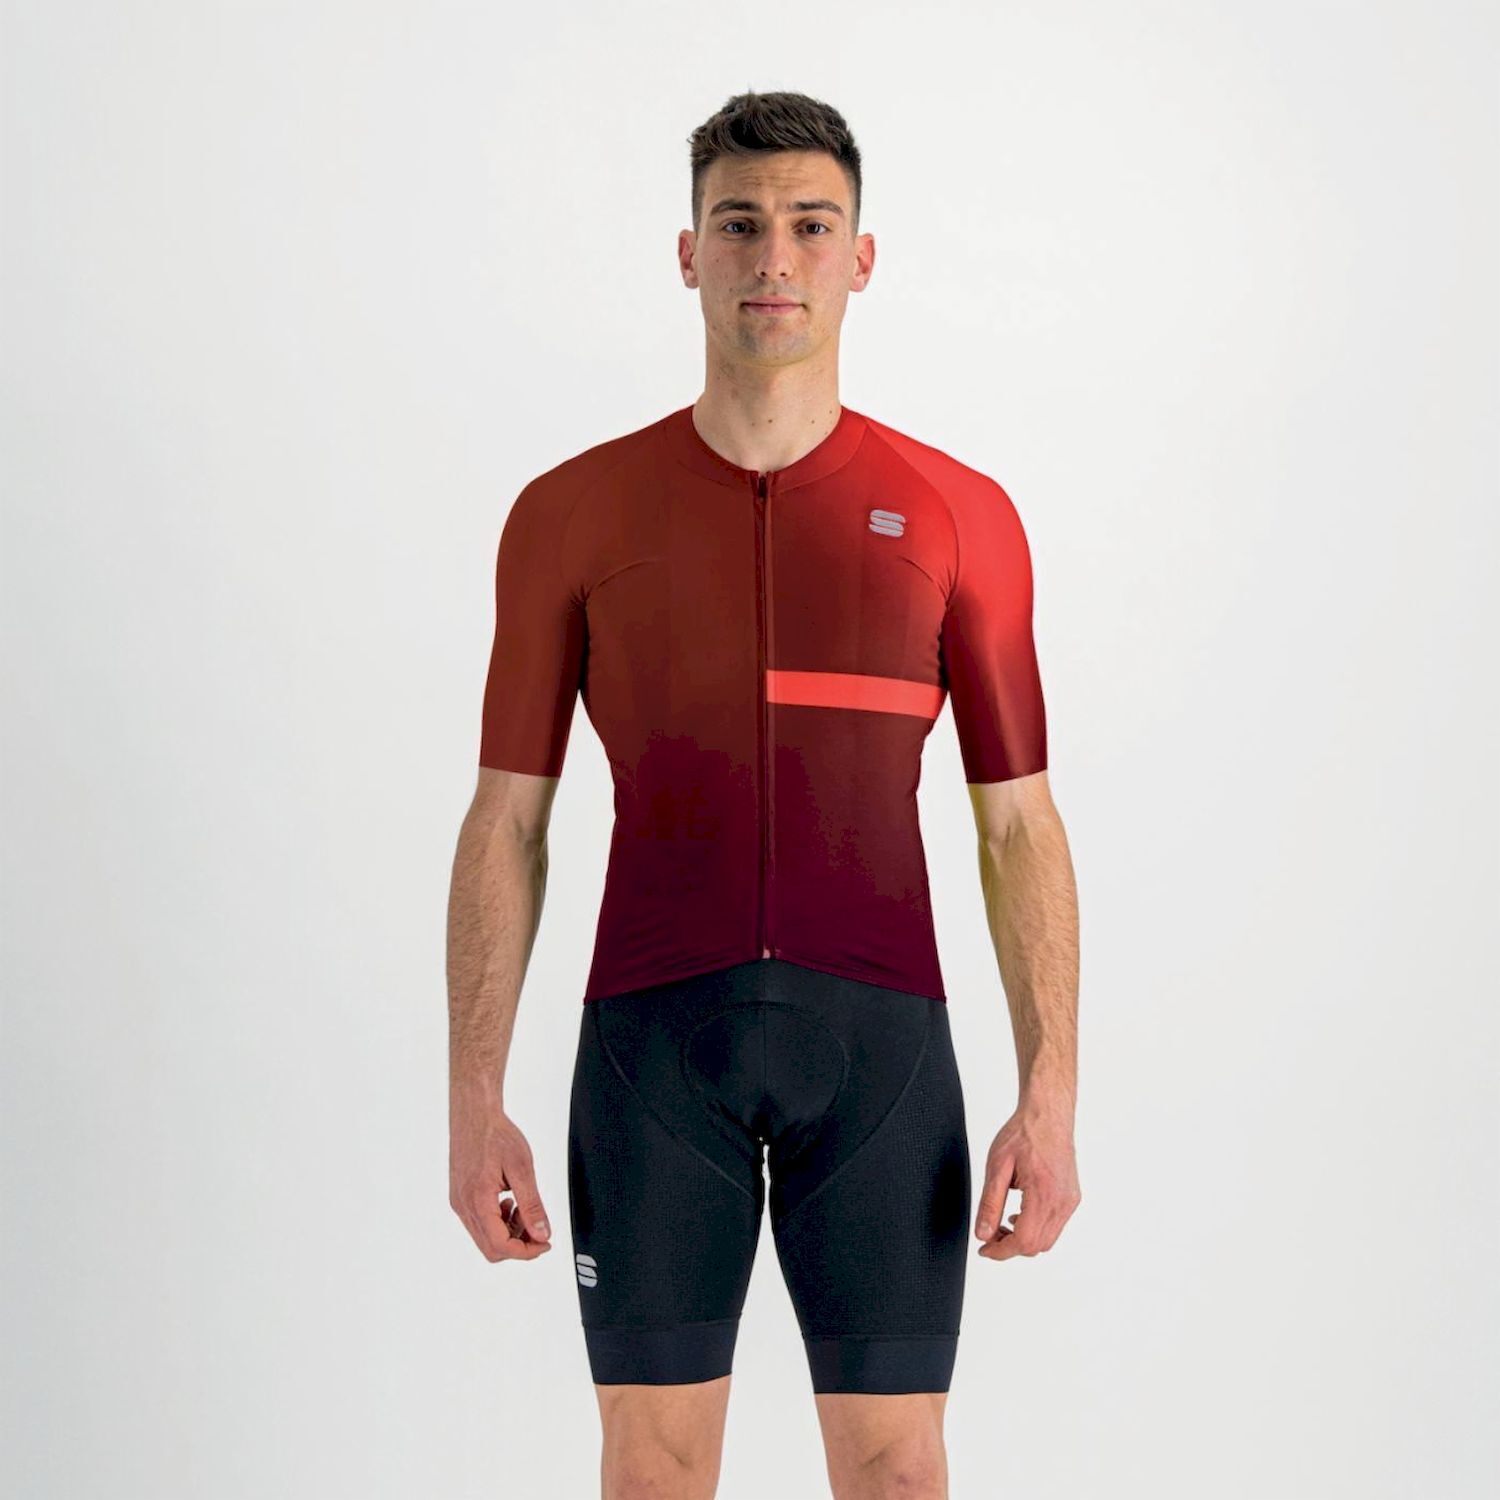 Sportful Bomber Jersey - Maillot ciclismo - Hombre